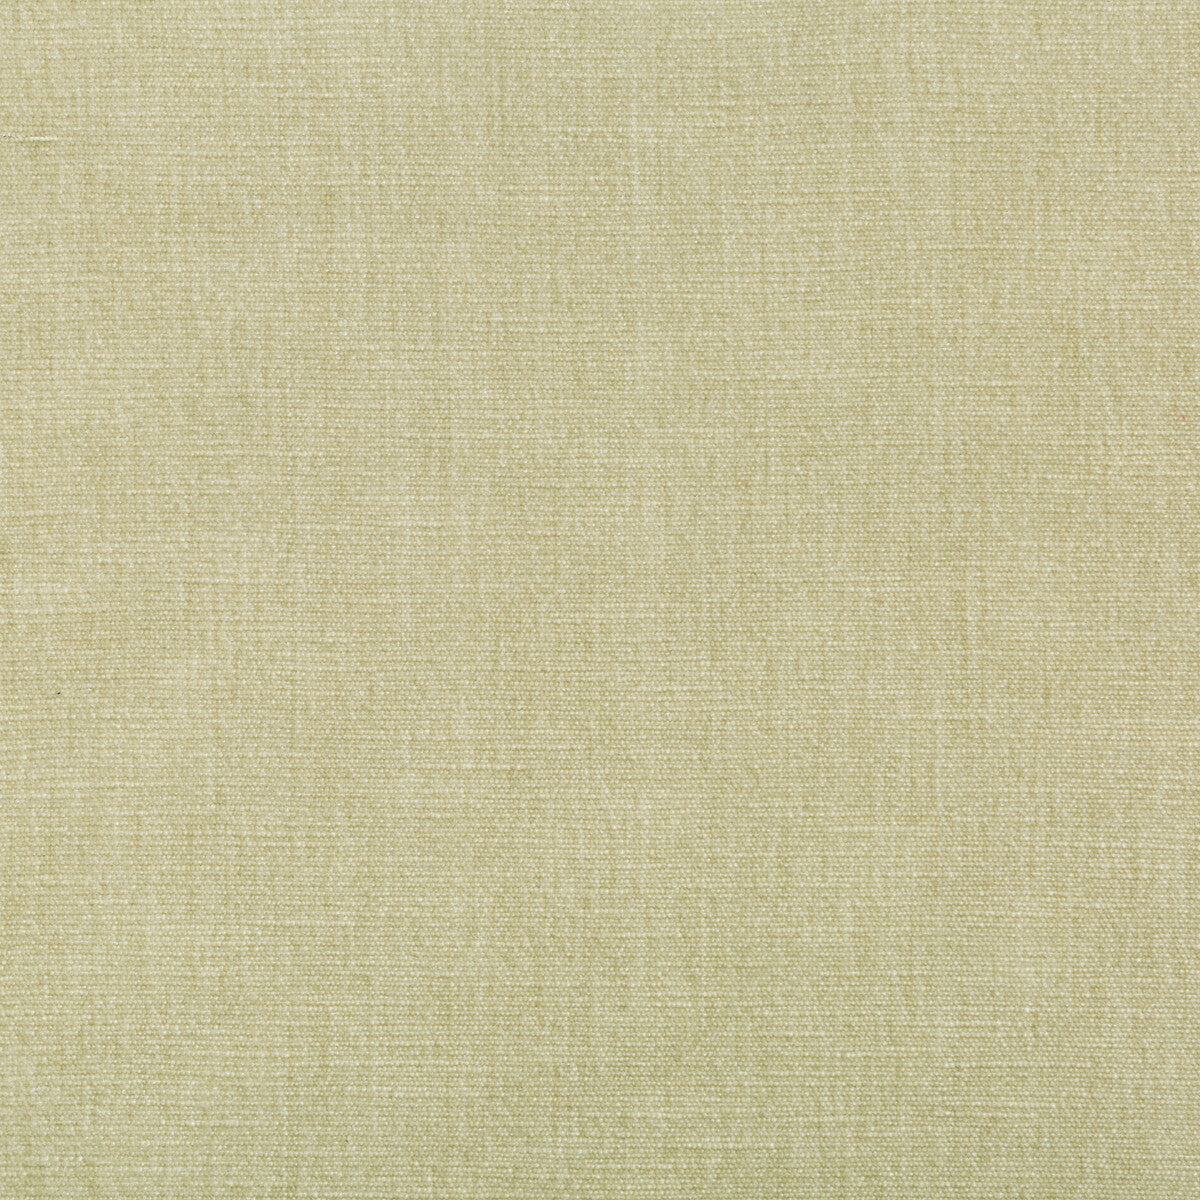 Kravet Smart fabric in 36076-1611 color - pattern 36076.1611.0 - by Kravet Smart in the Sumptuous Chenille II collection